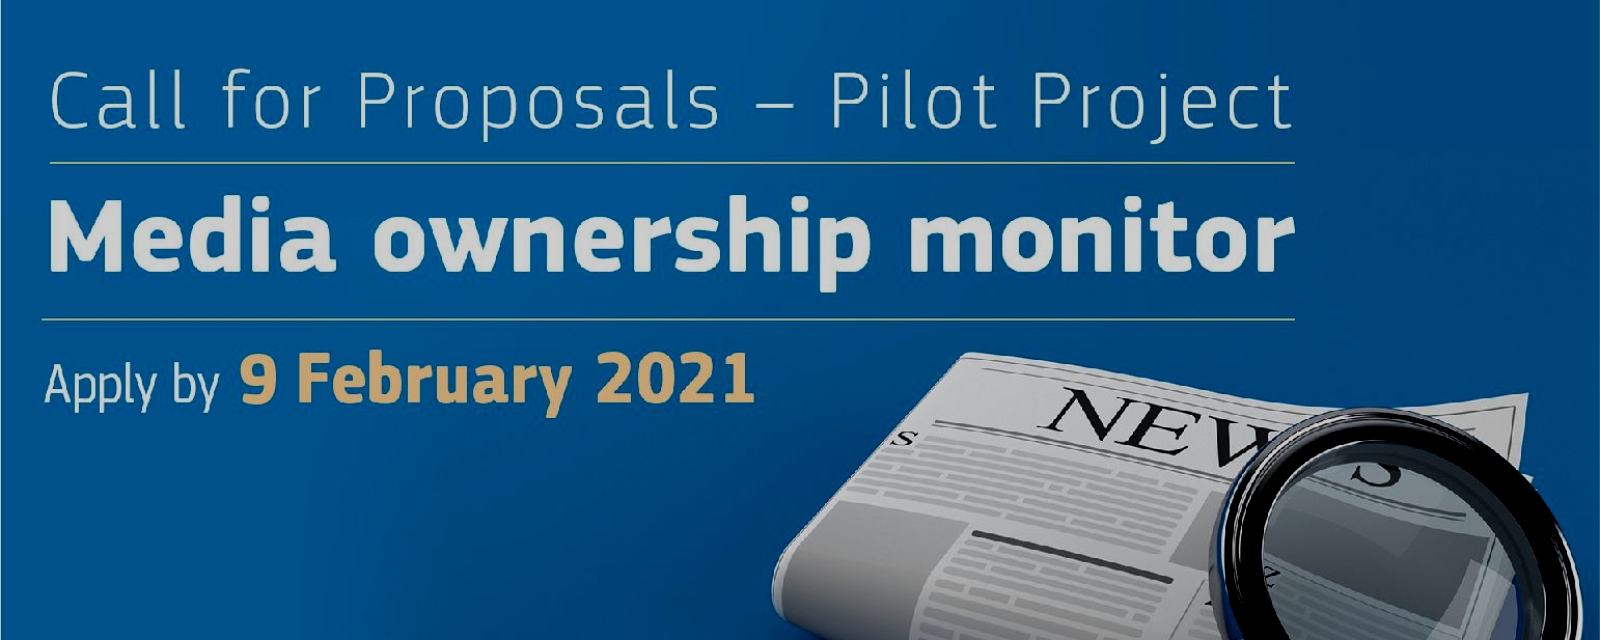 call_for_proposals_media_ownership_monitor